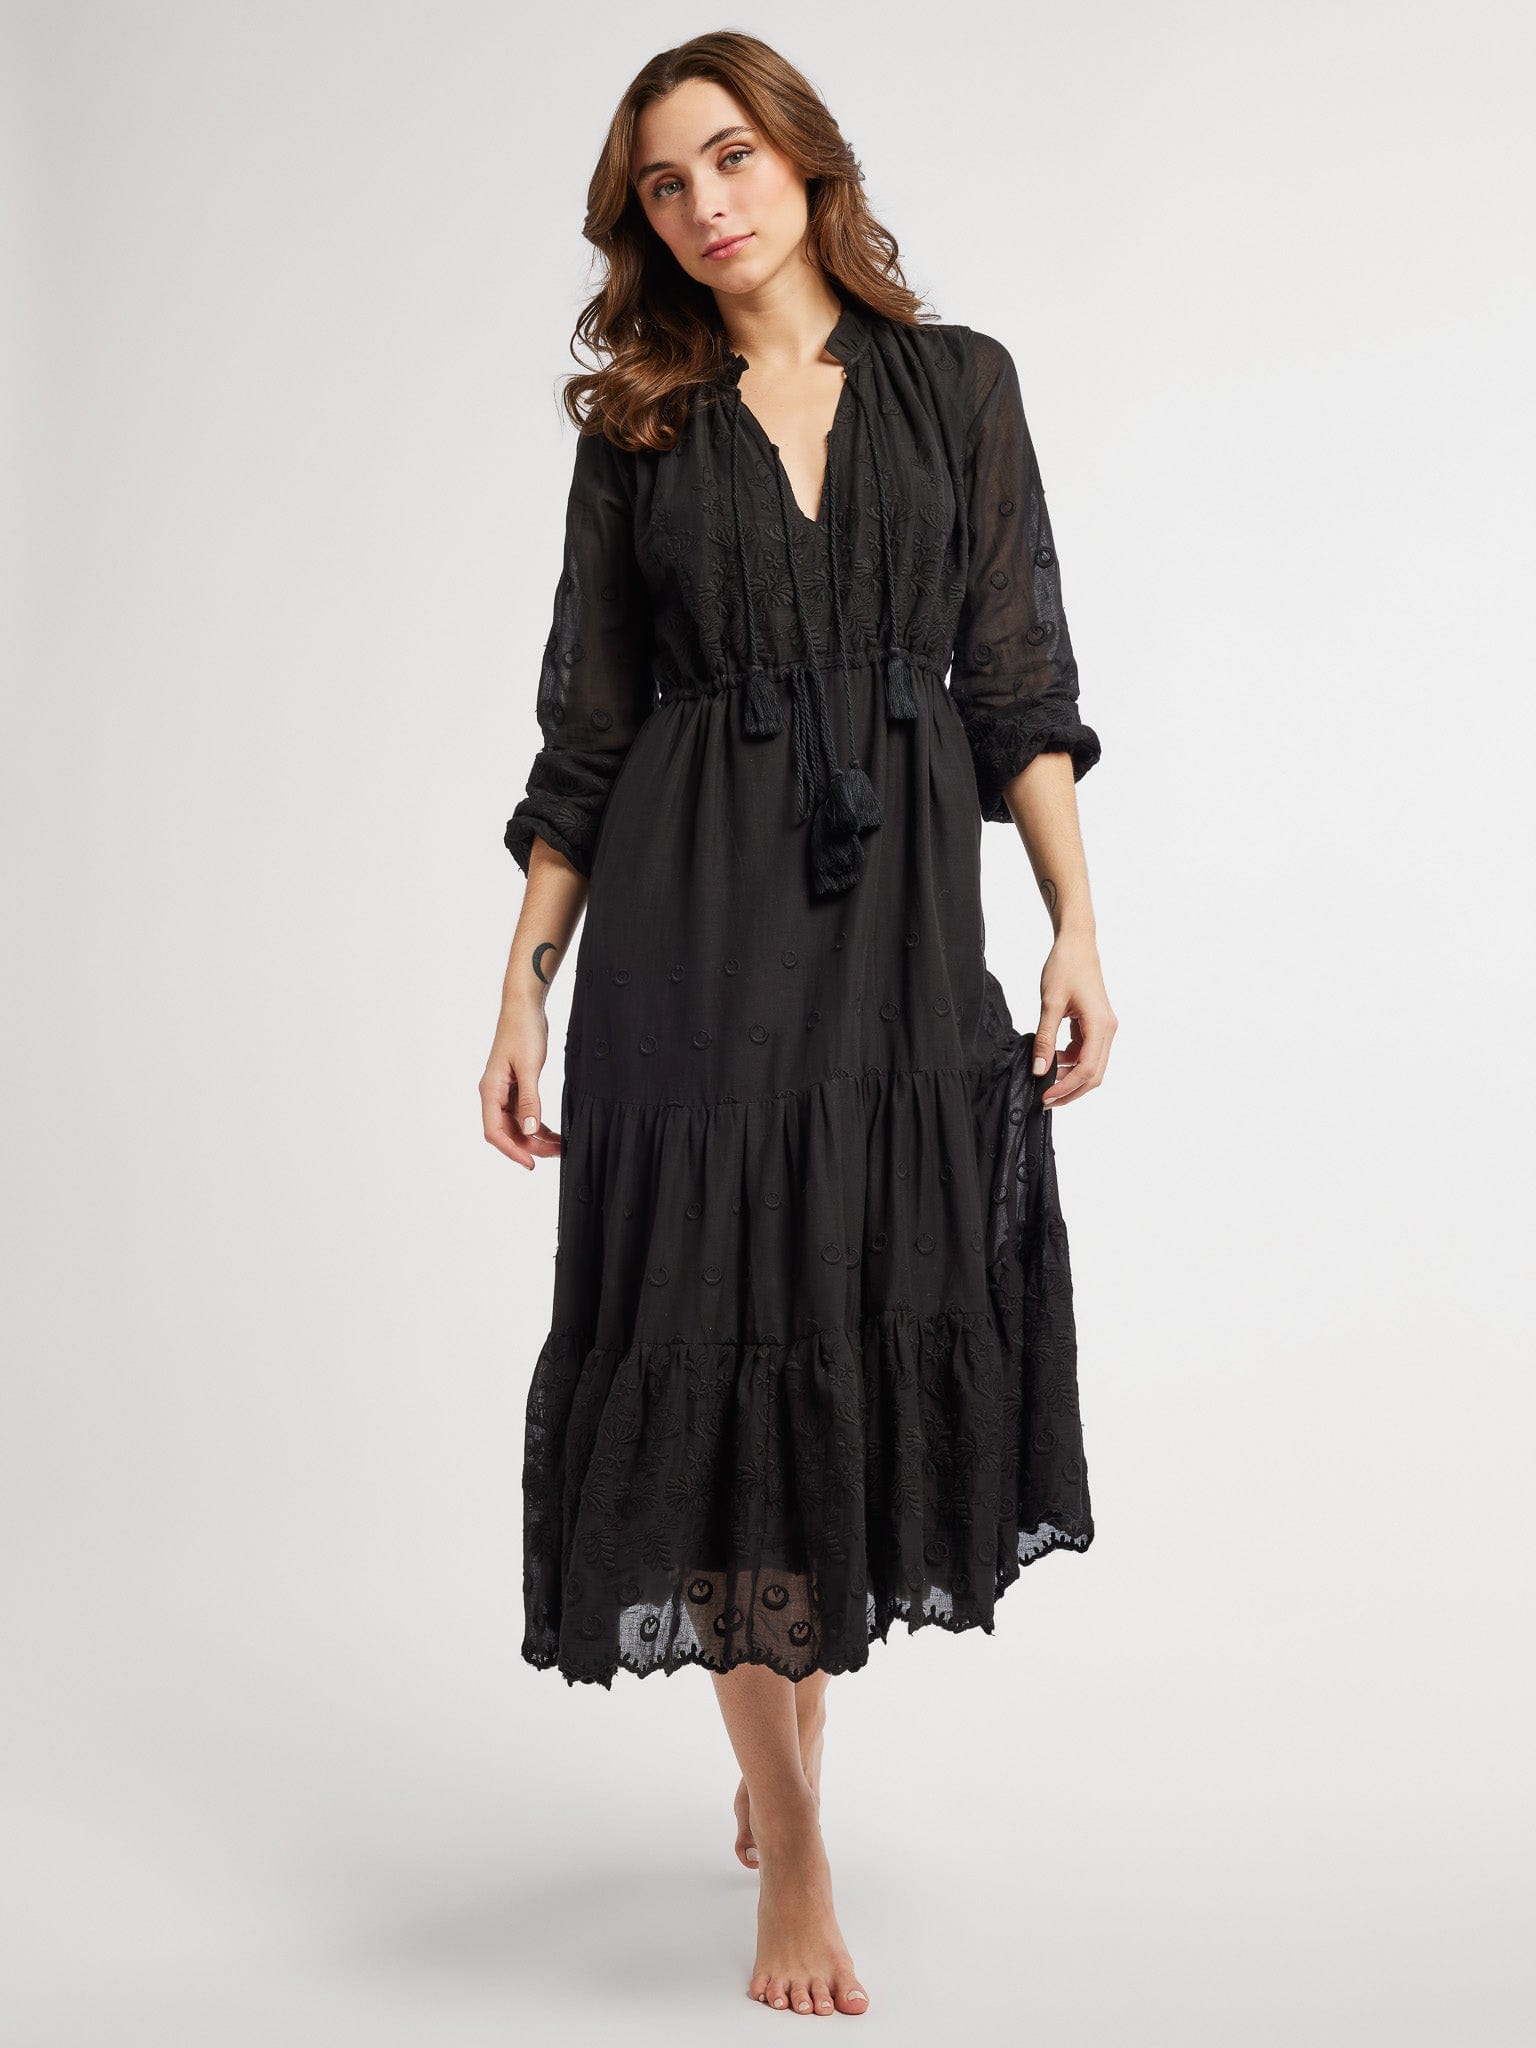 MILLE Clothing Astrid Dress in Black Petal Embroidery